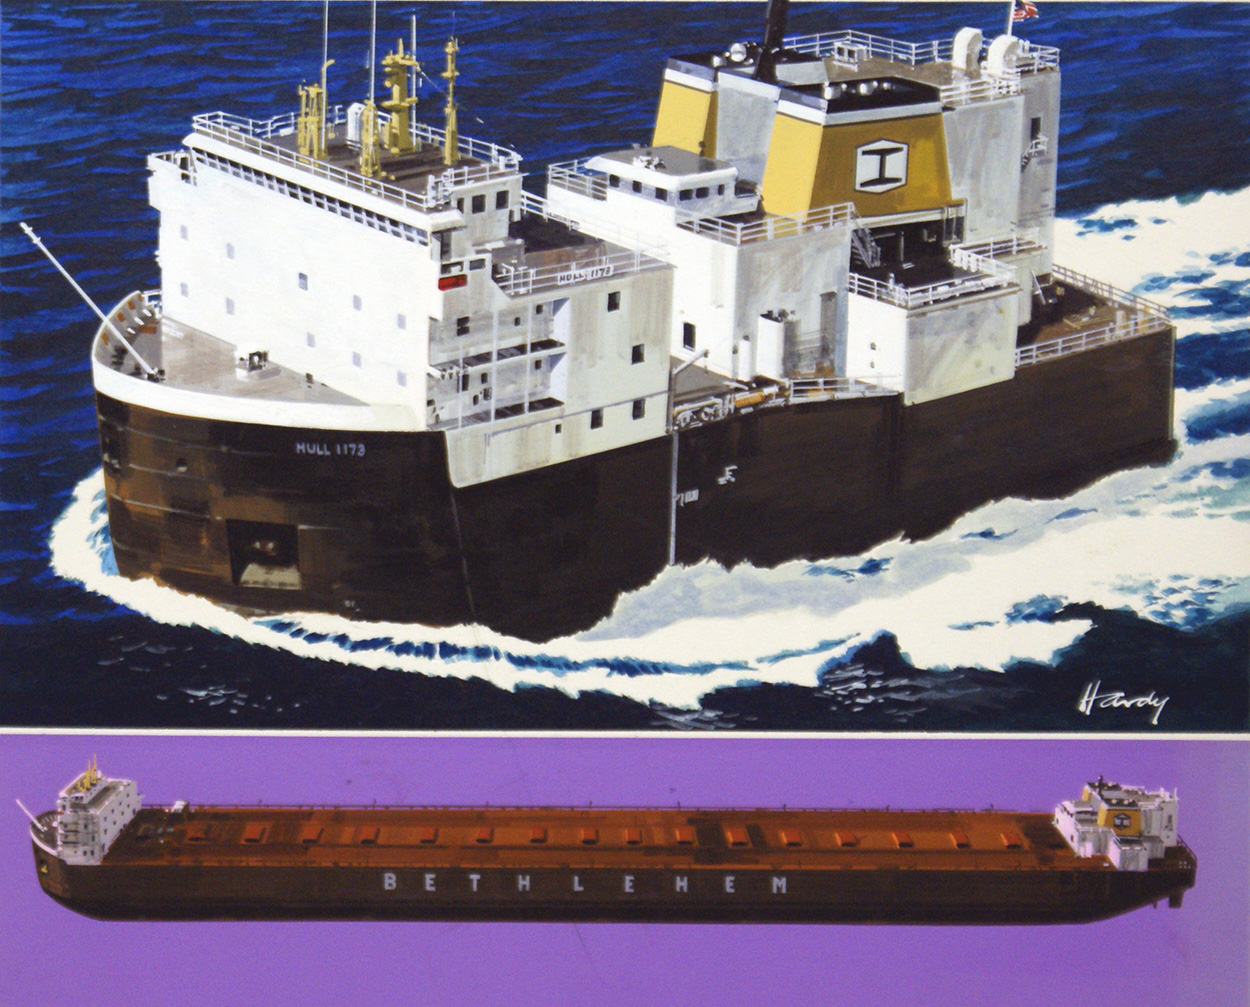 The Shortest Longest Tanker in the World (Original) (Signed) art by Sea (Wilf Hardy) at The Illustration Art Gallery